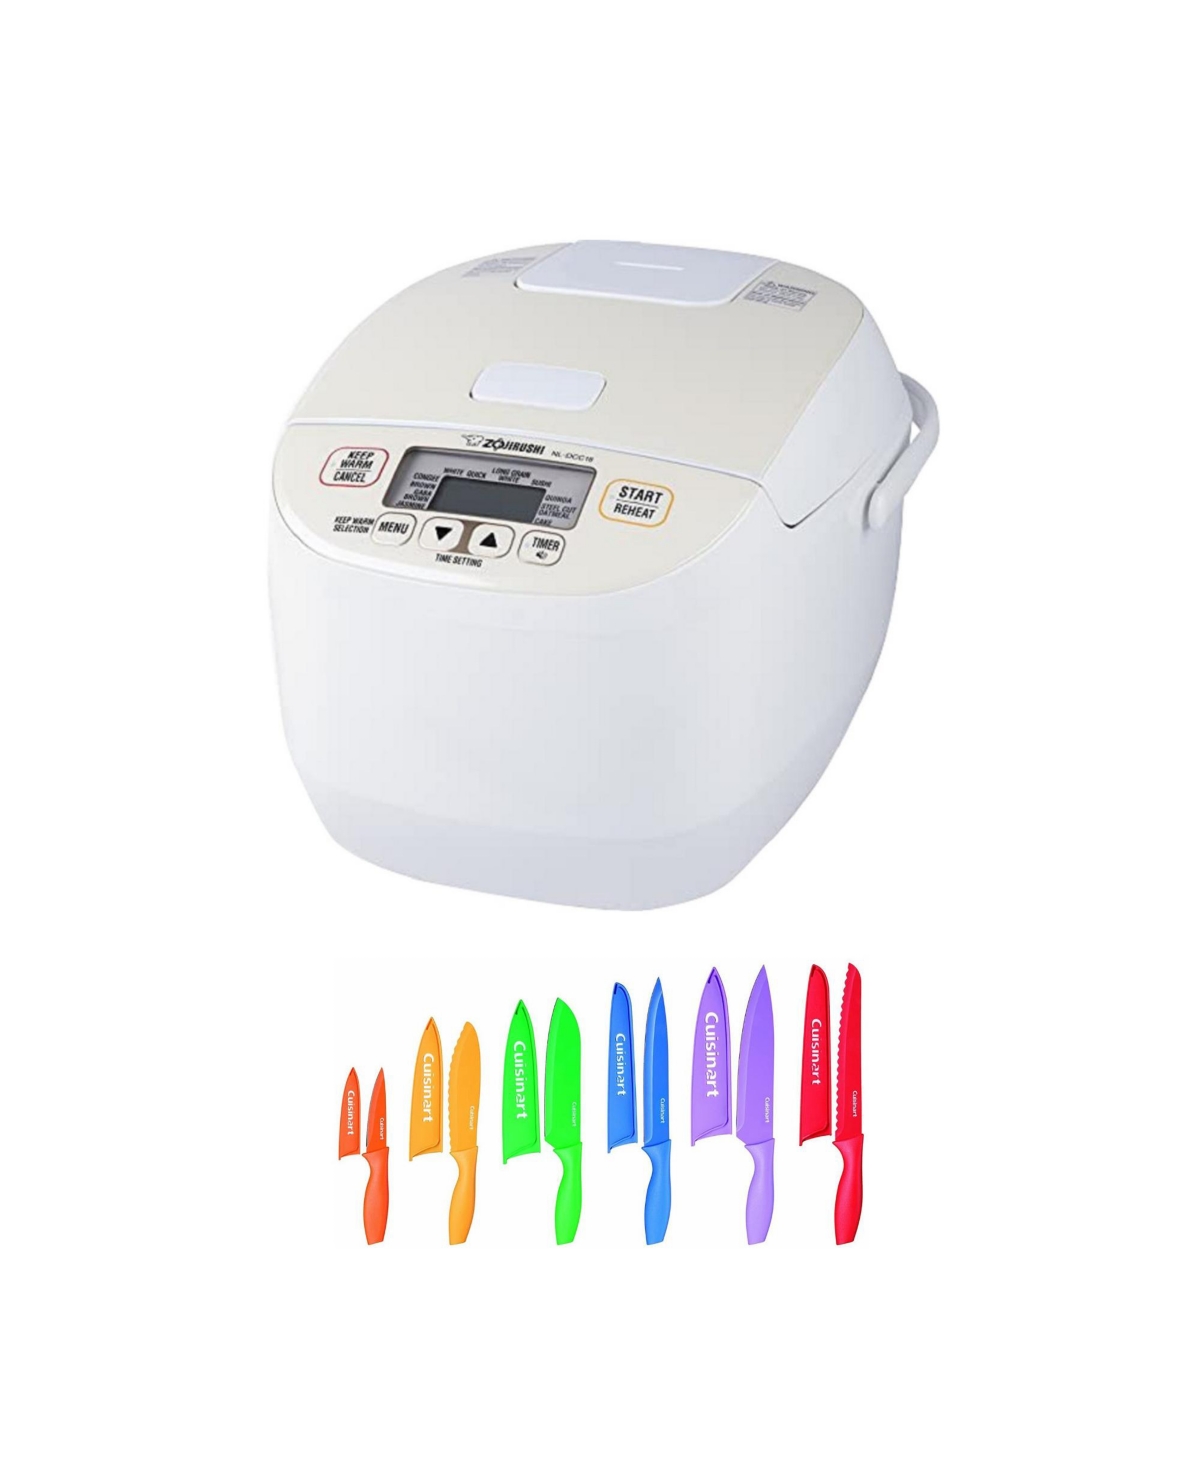 Nl-DCC18CP Micom Rice Cooker and Warmer (Pearl Beige) with Knife set - White